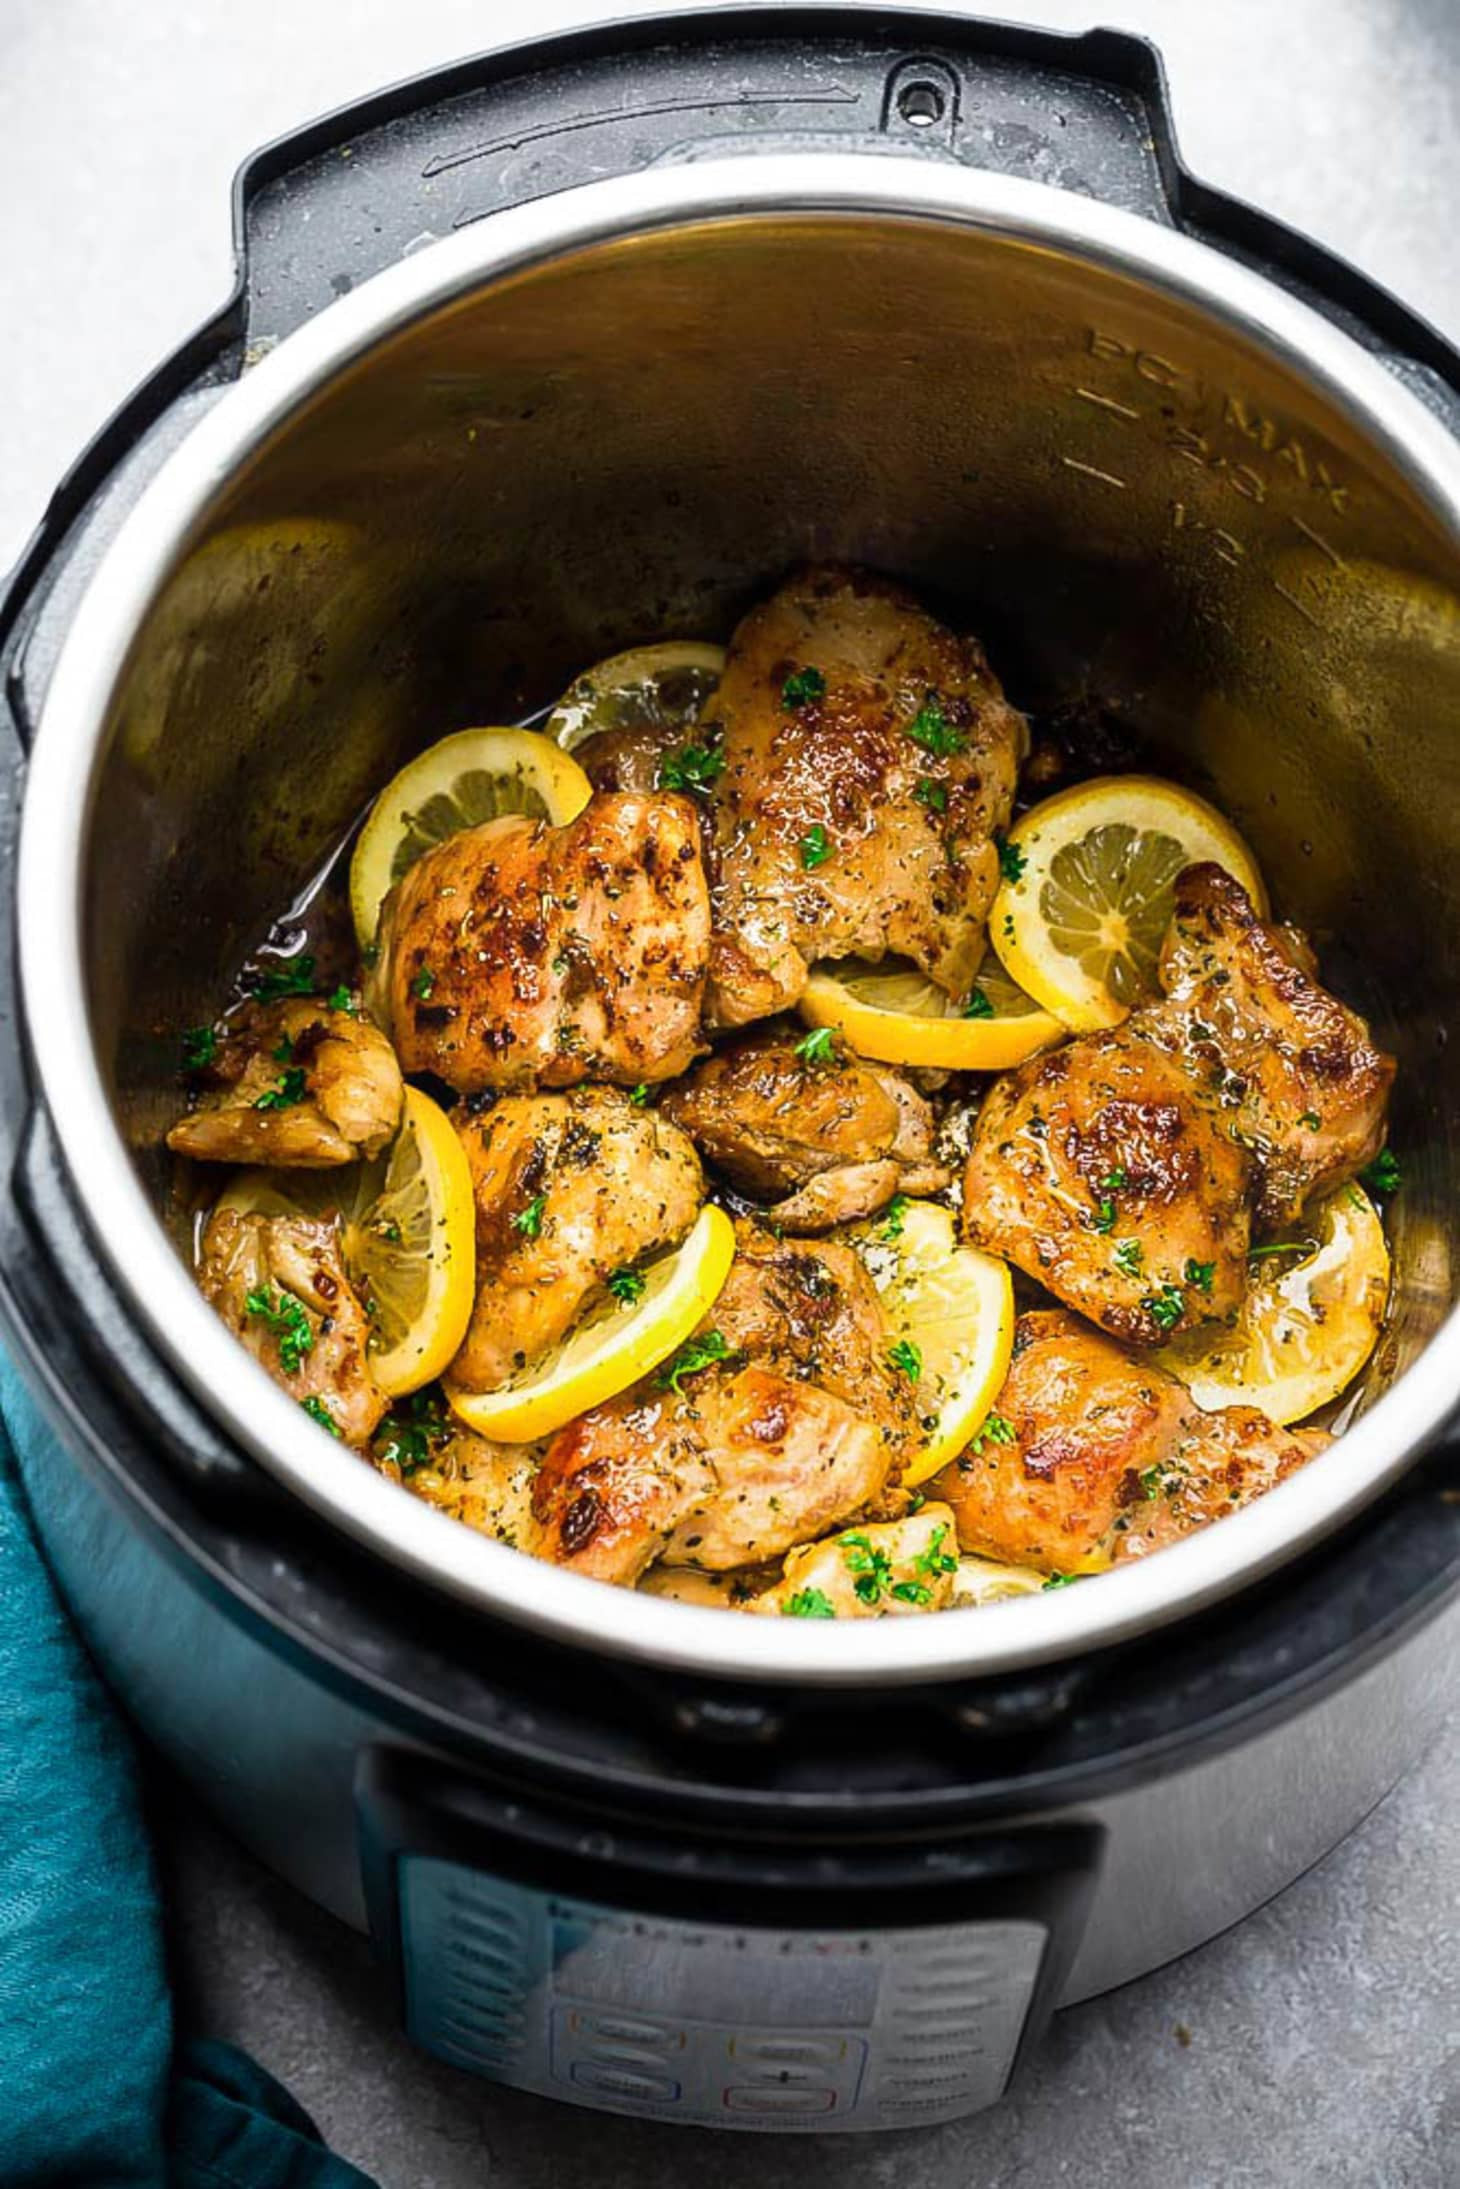 Favorite Instant Pot Recipes
 10 Delicious Instant Pot Recipes to Make in 2019